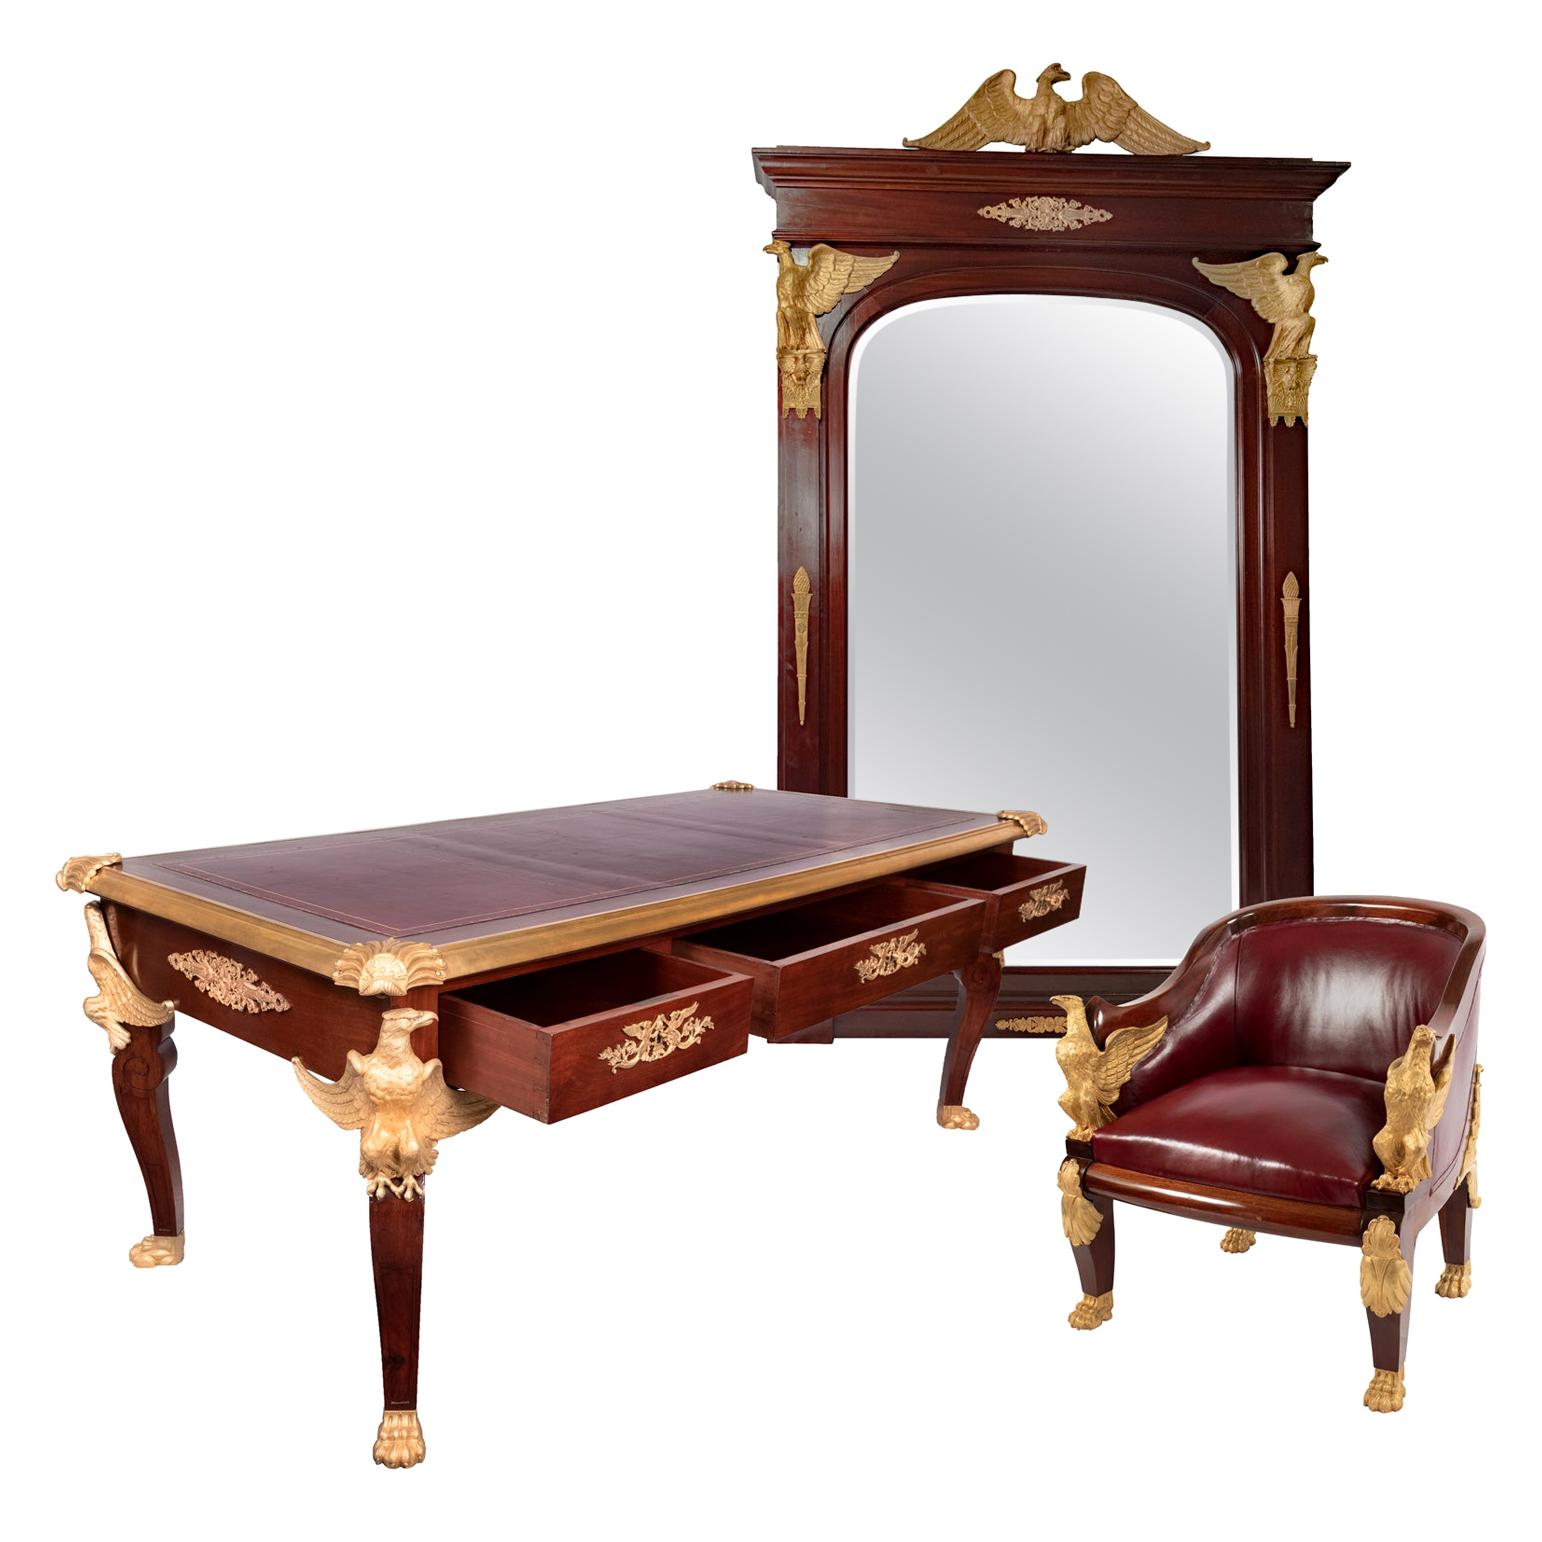 Russian Imperial Style Desk, Chair, and Mirror For Sale